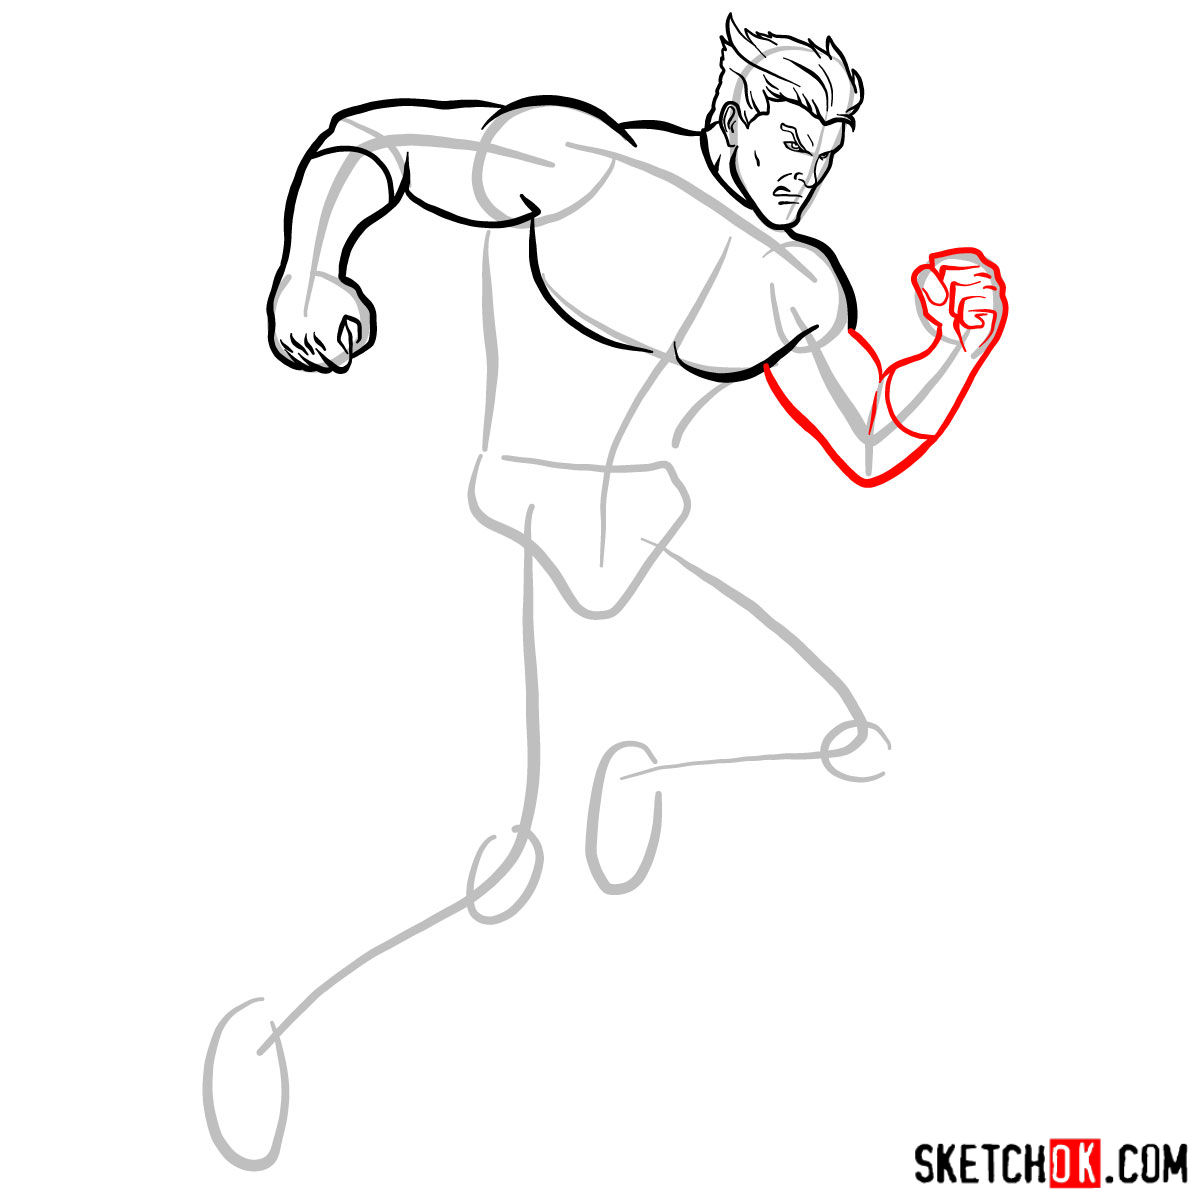 How to draw Quicksilver from Marvel Comics - step 07